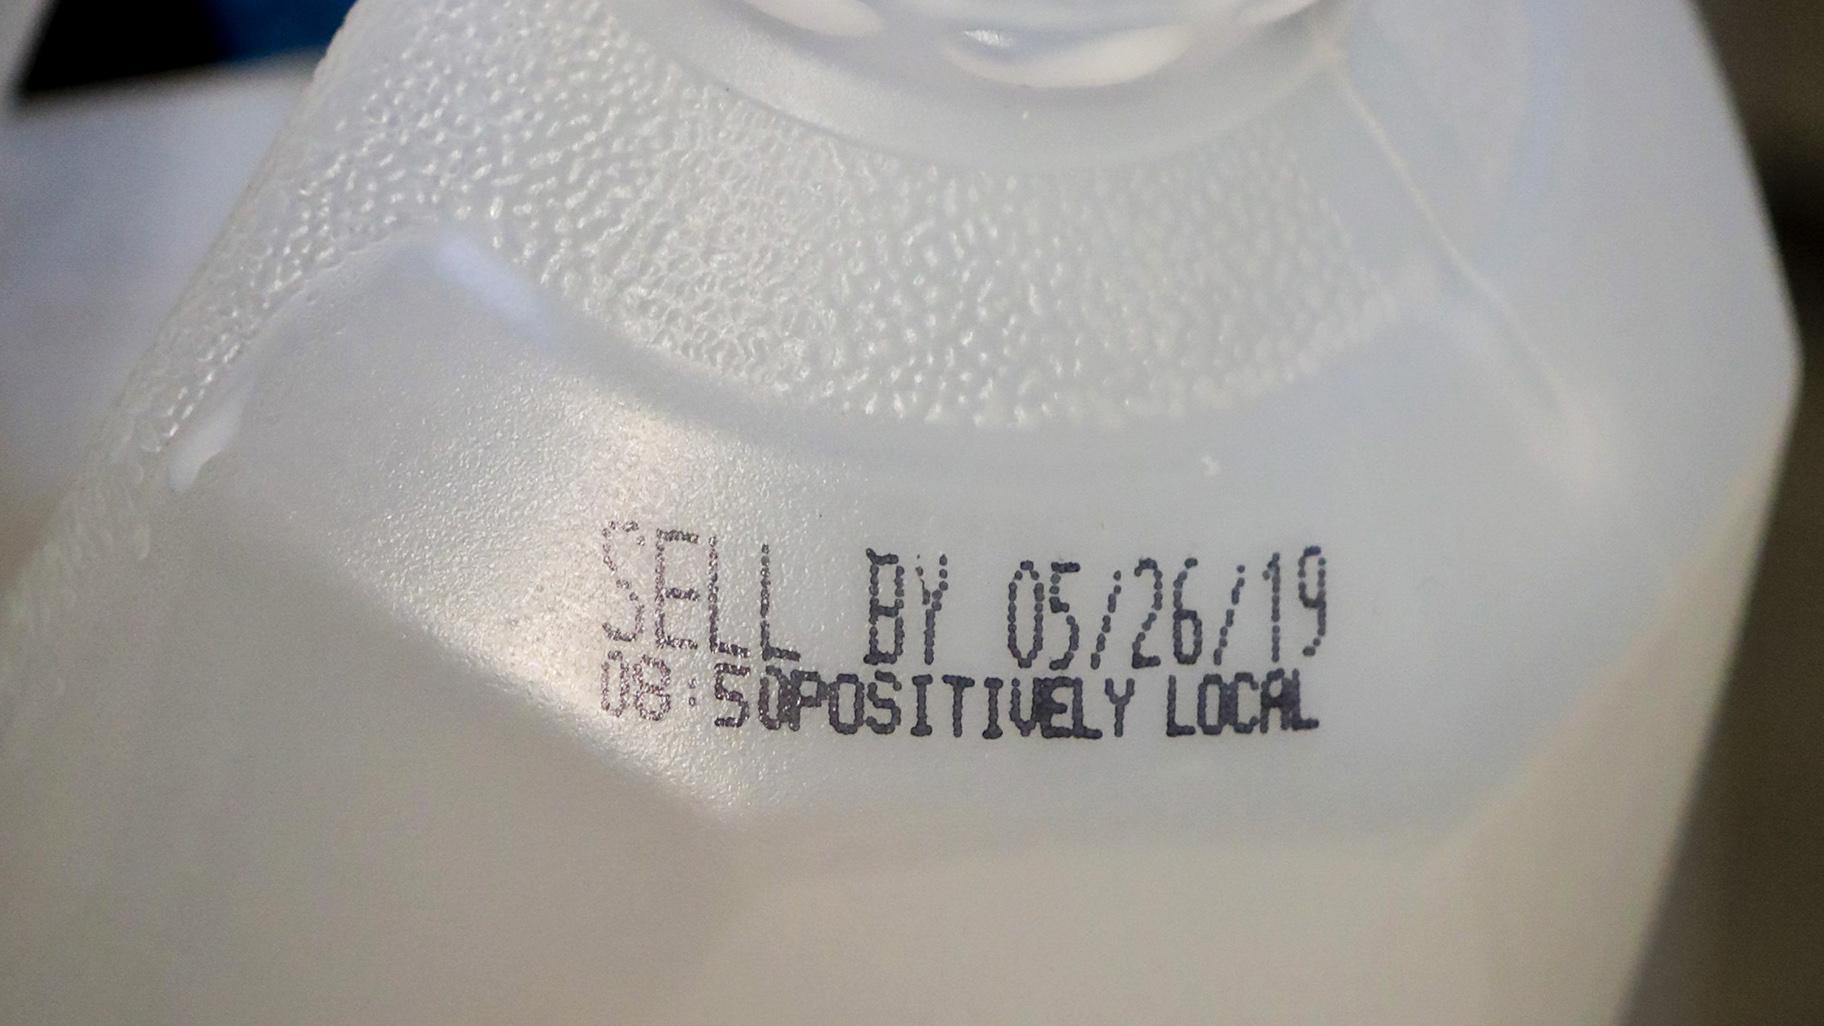 This Friday, May 24, 2019 photo shows the “sell by” date for a jug of milk in New York. In May 2019, U.S. regulators are again urging food makers to reduce the variety of terms like “best by” and “use by” that cause confusion about when food should be thrown out. (AP Photo / Bebeto Matthews)